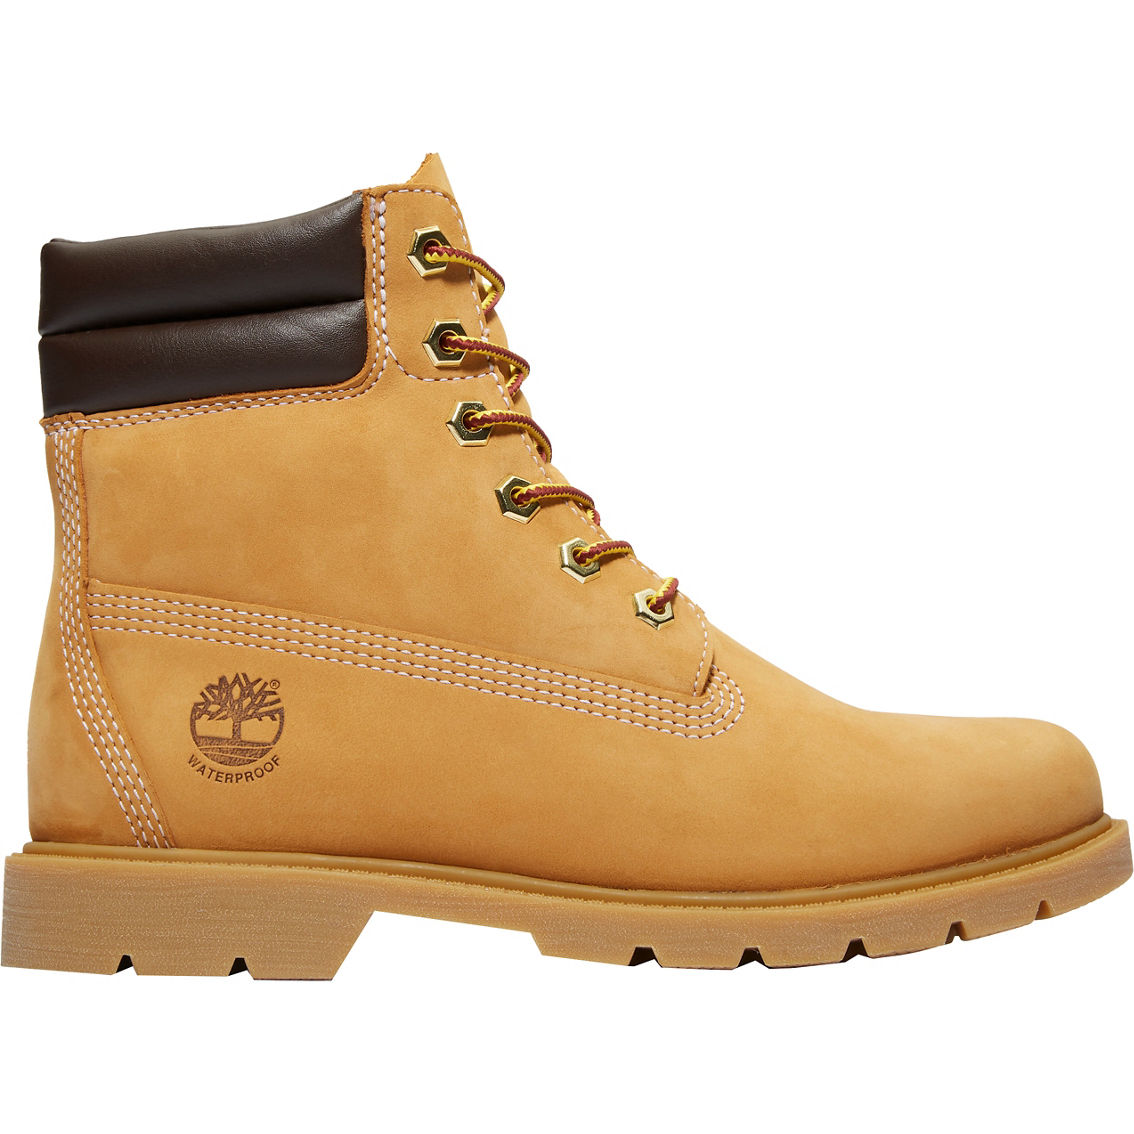 Timberland Women's Linden Woods 6 In. Waterproof Boots | Boots | Shoes ...